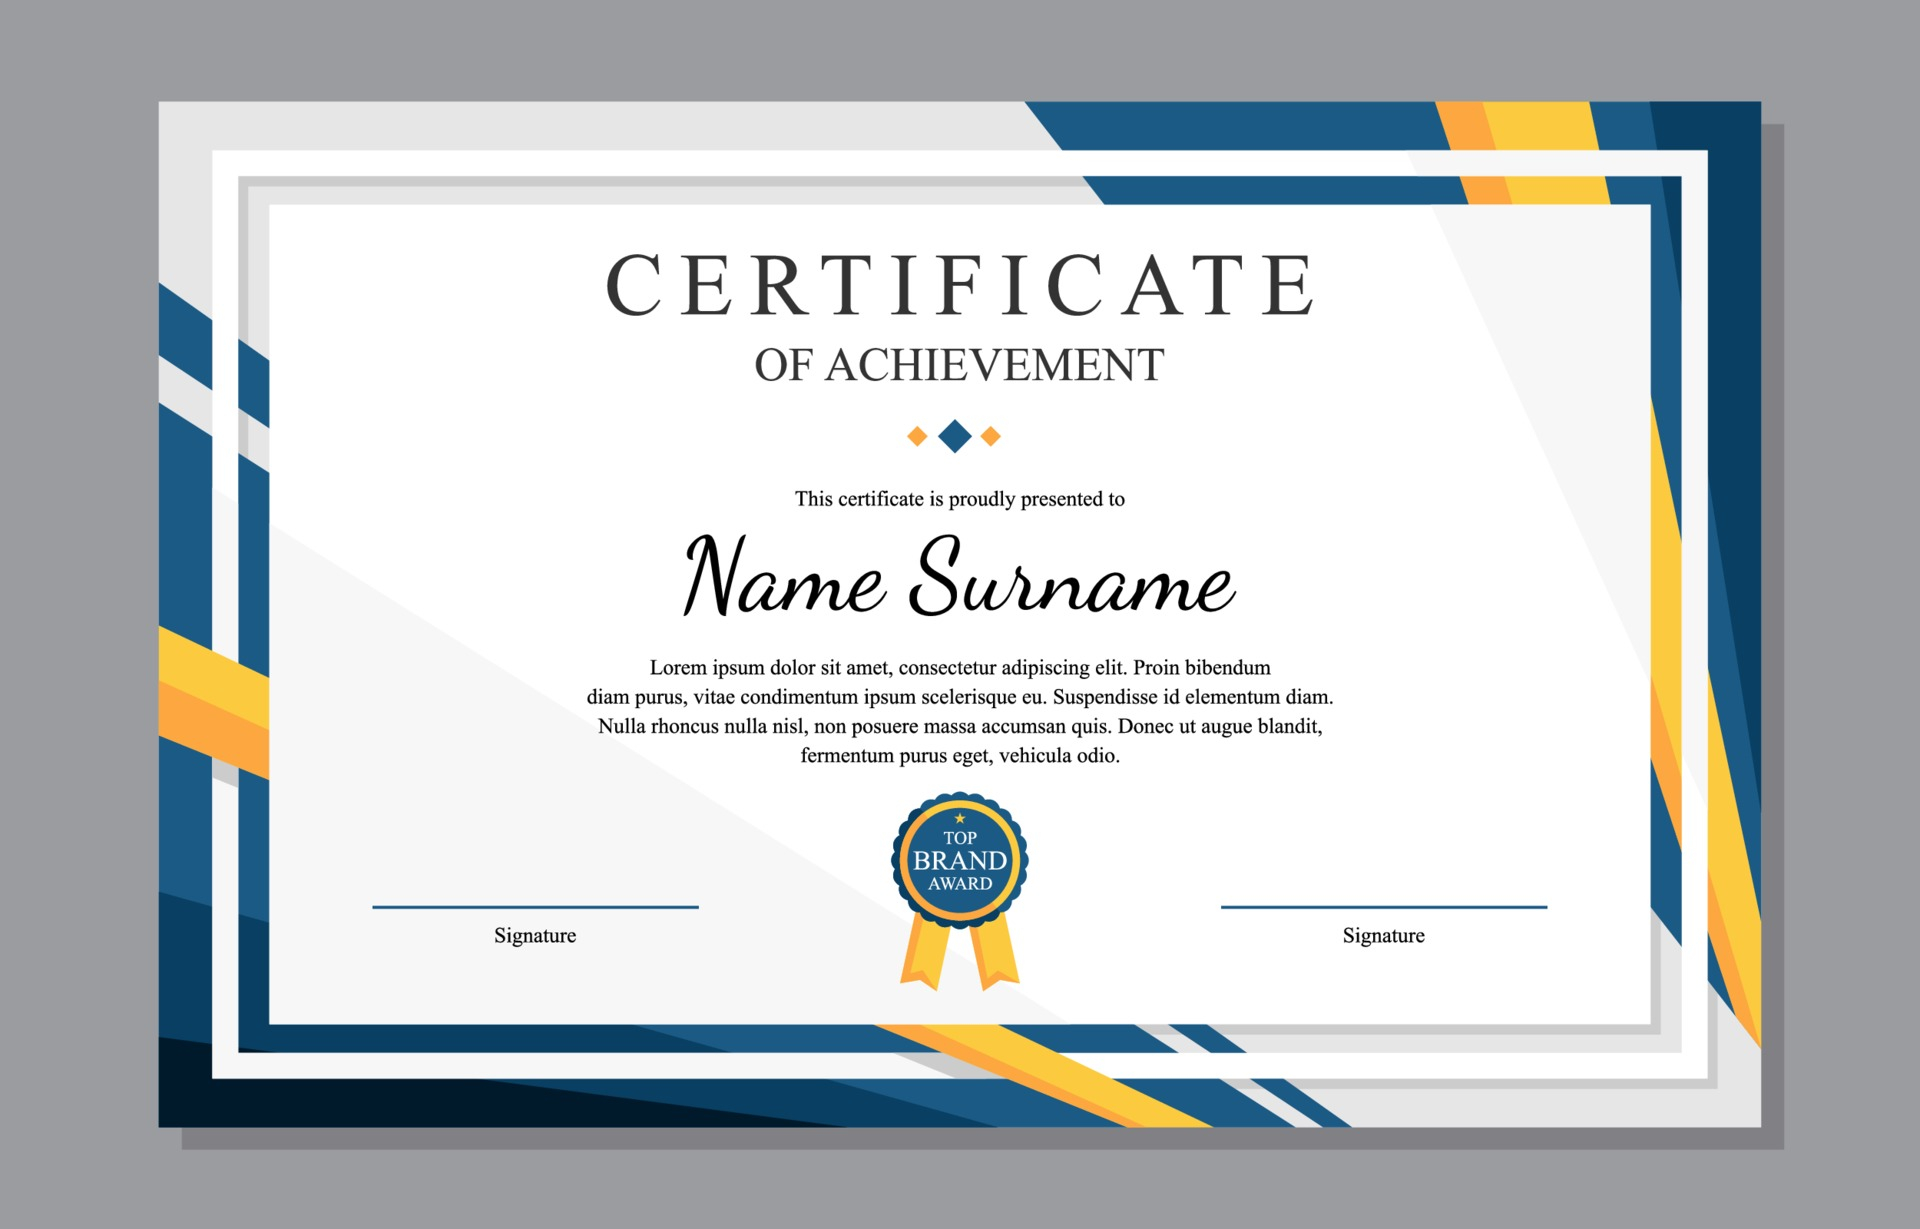 Certificate Templates, Free Certificate Designs With Regard To Participation Certificate Templates Free Download